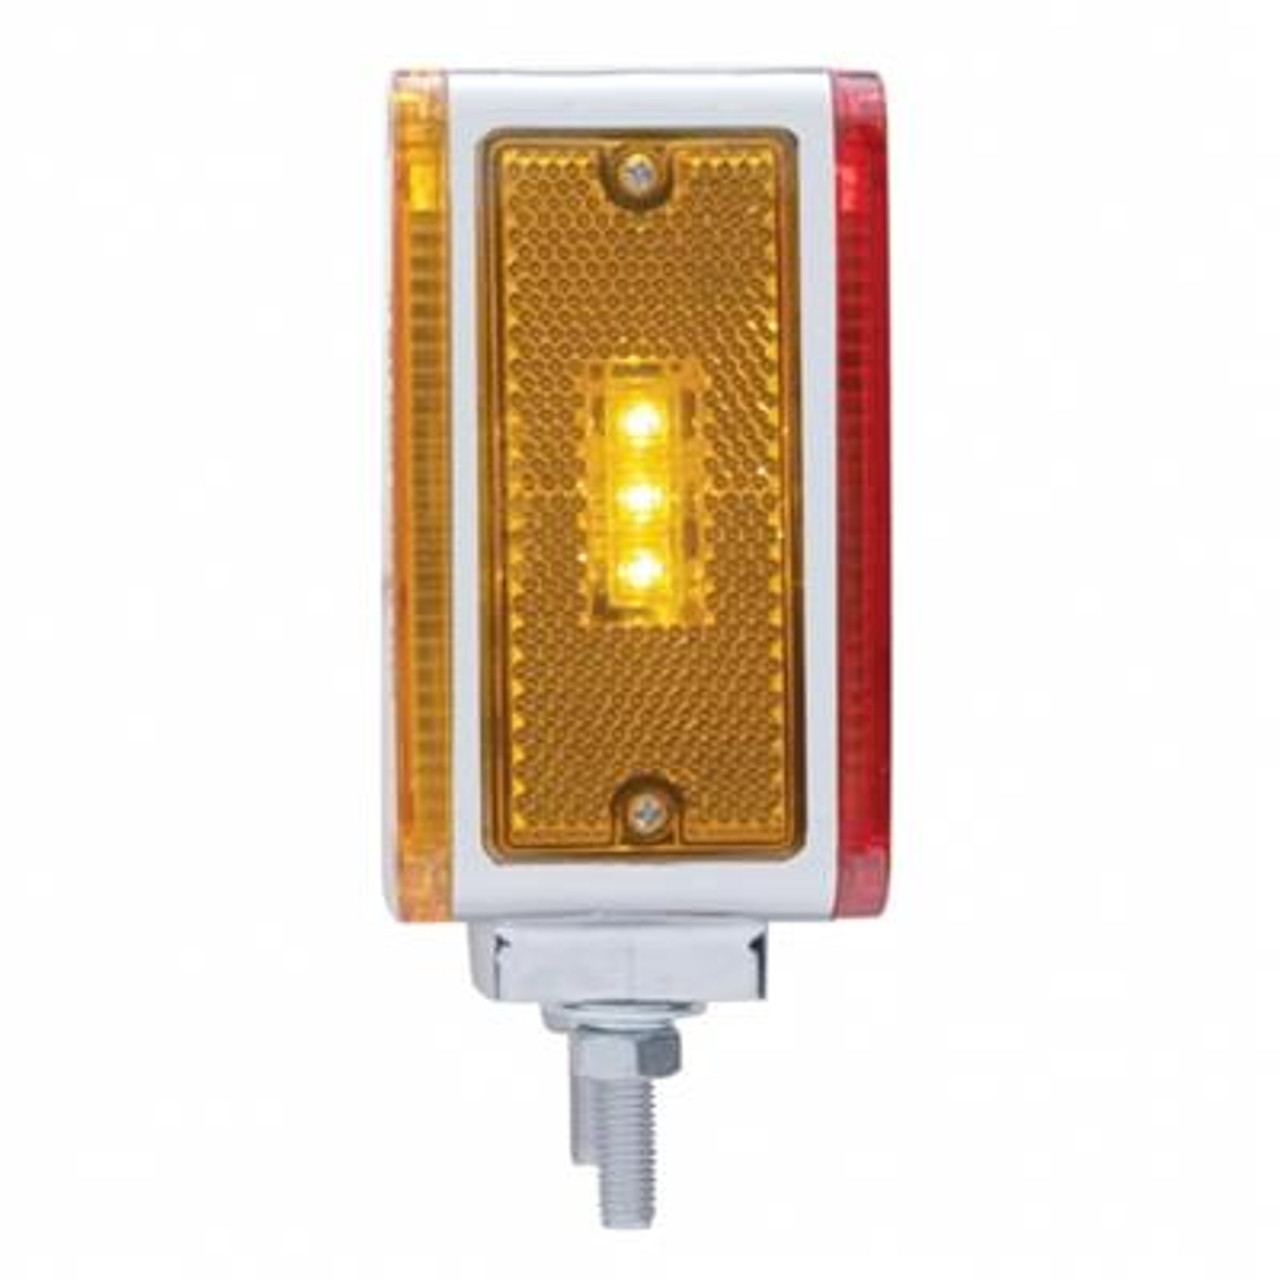 39 LED Reflector Double Face Turn Signal Light (Driver) - Amber & Red LED/Amber & Red Lens